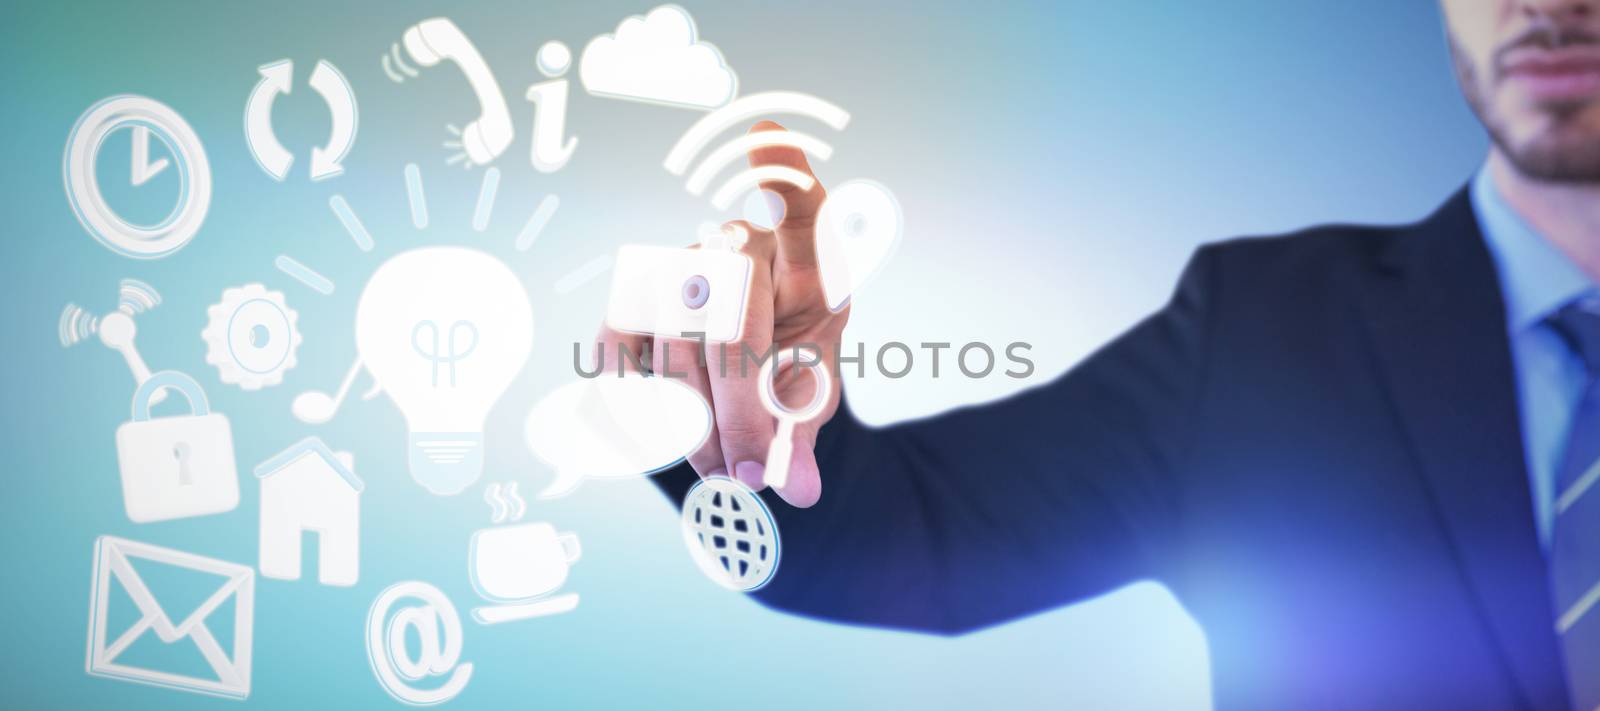 Cropped image of businessman touching index finger on invisible screen against abstract blue background